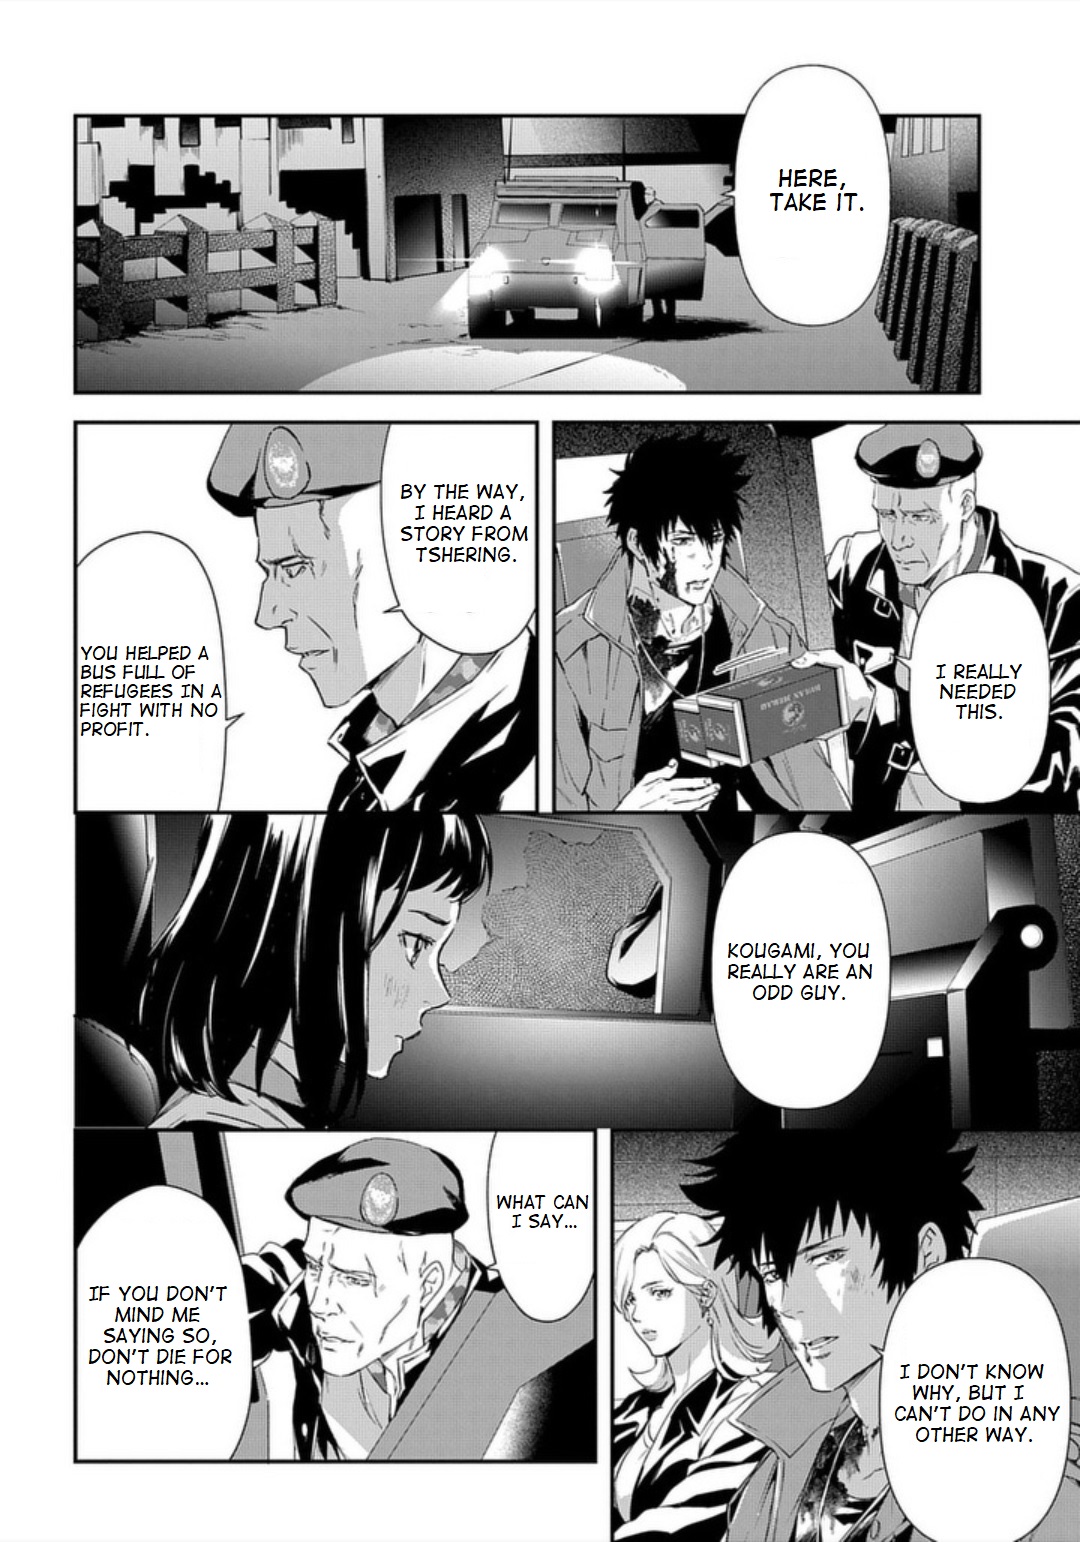 Psycho Pass: Sinners of the System Case 3 Beyond love and hate Vol. 1 Ch. 3